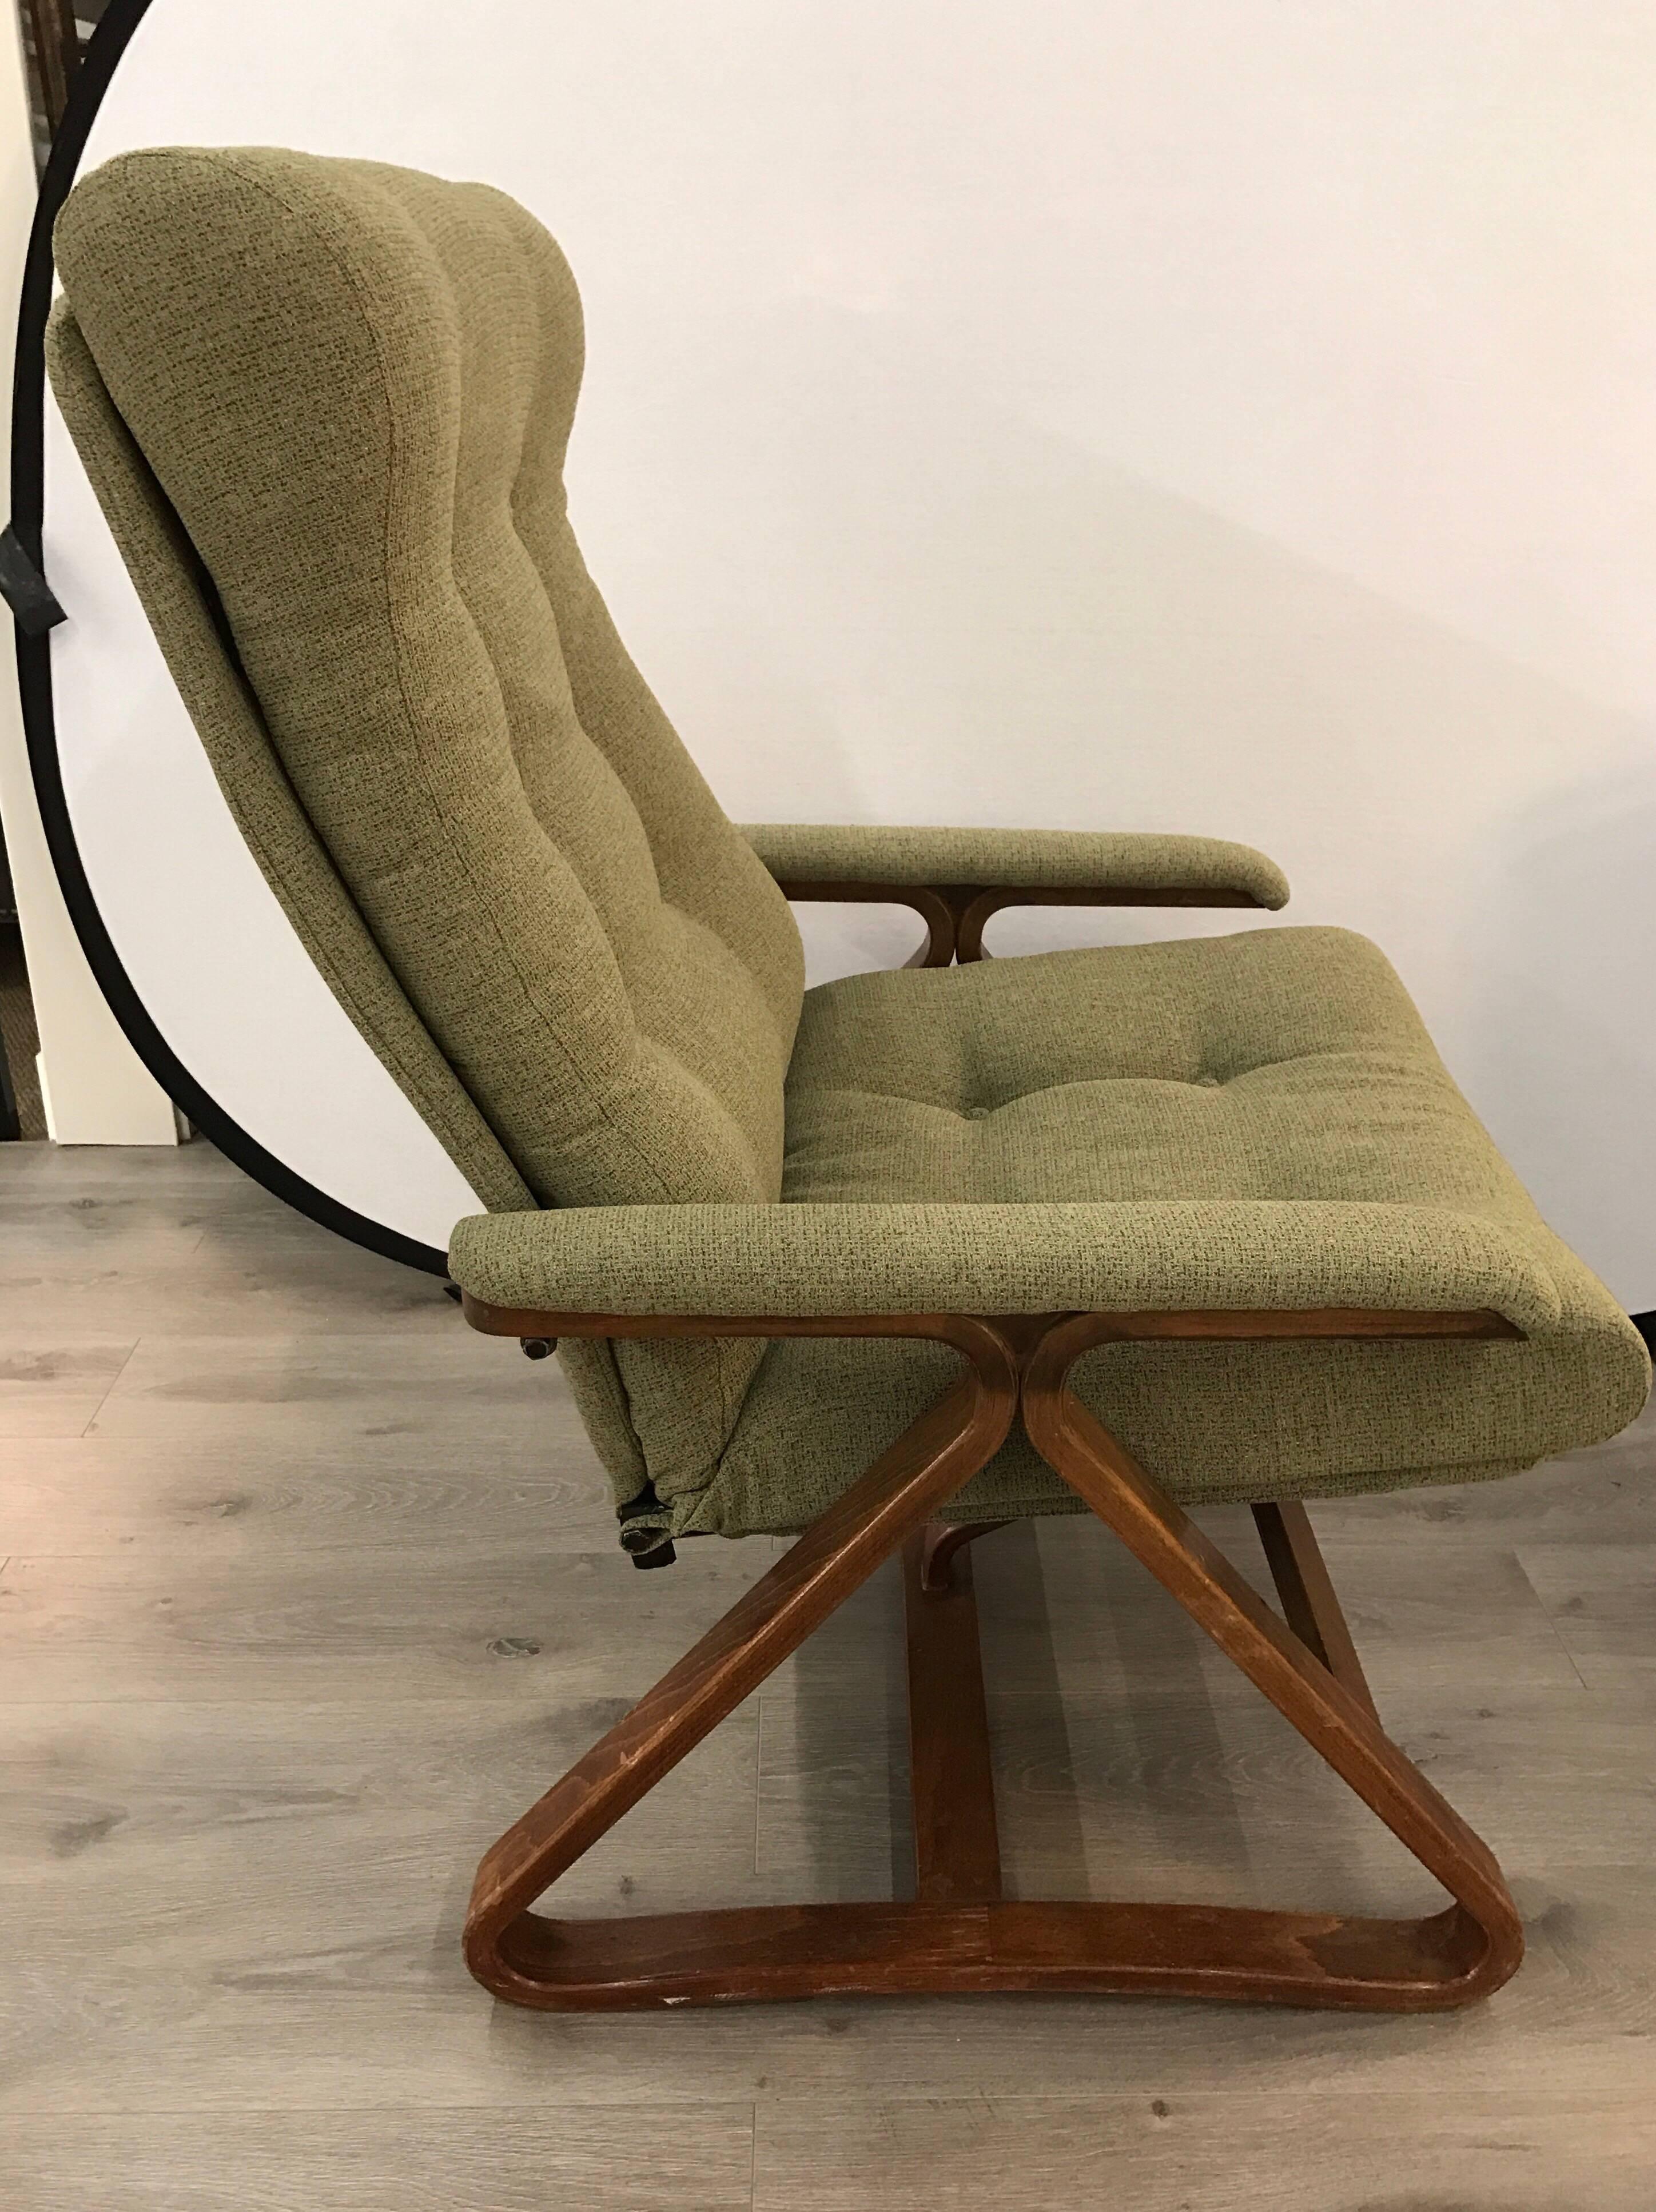 Mid-20th Century Mid-Century Modern Bentwood Recliner Reclining Lounge Chair